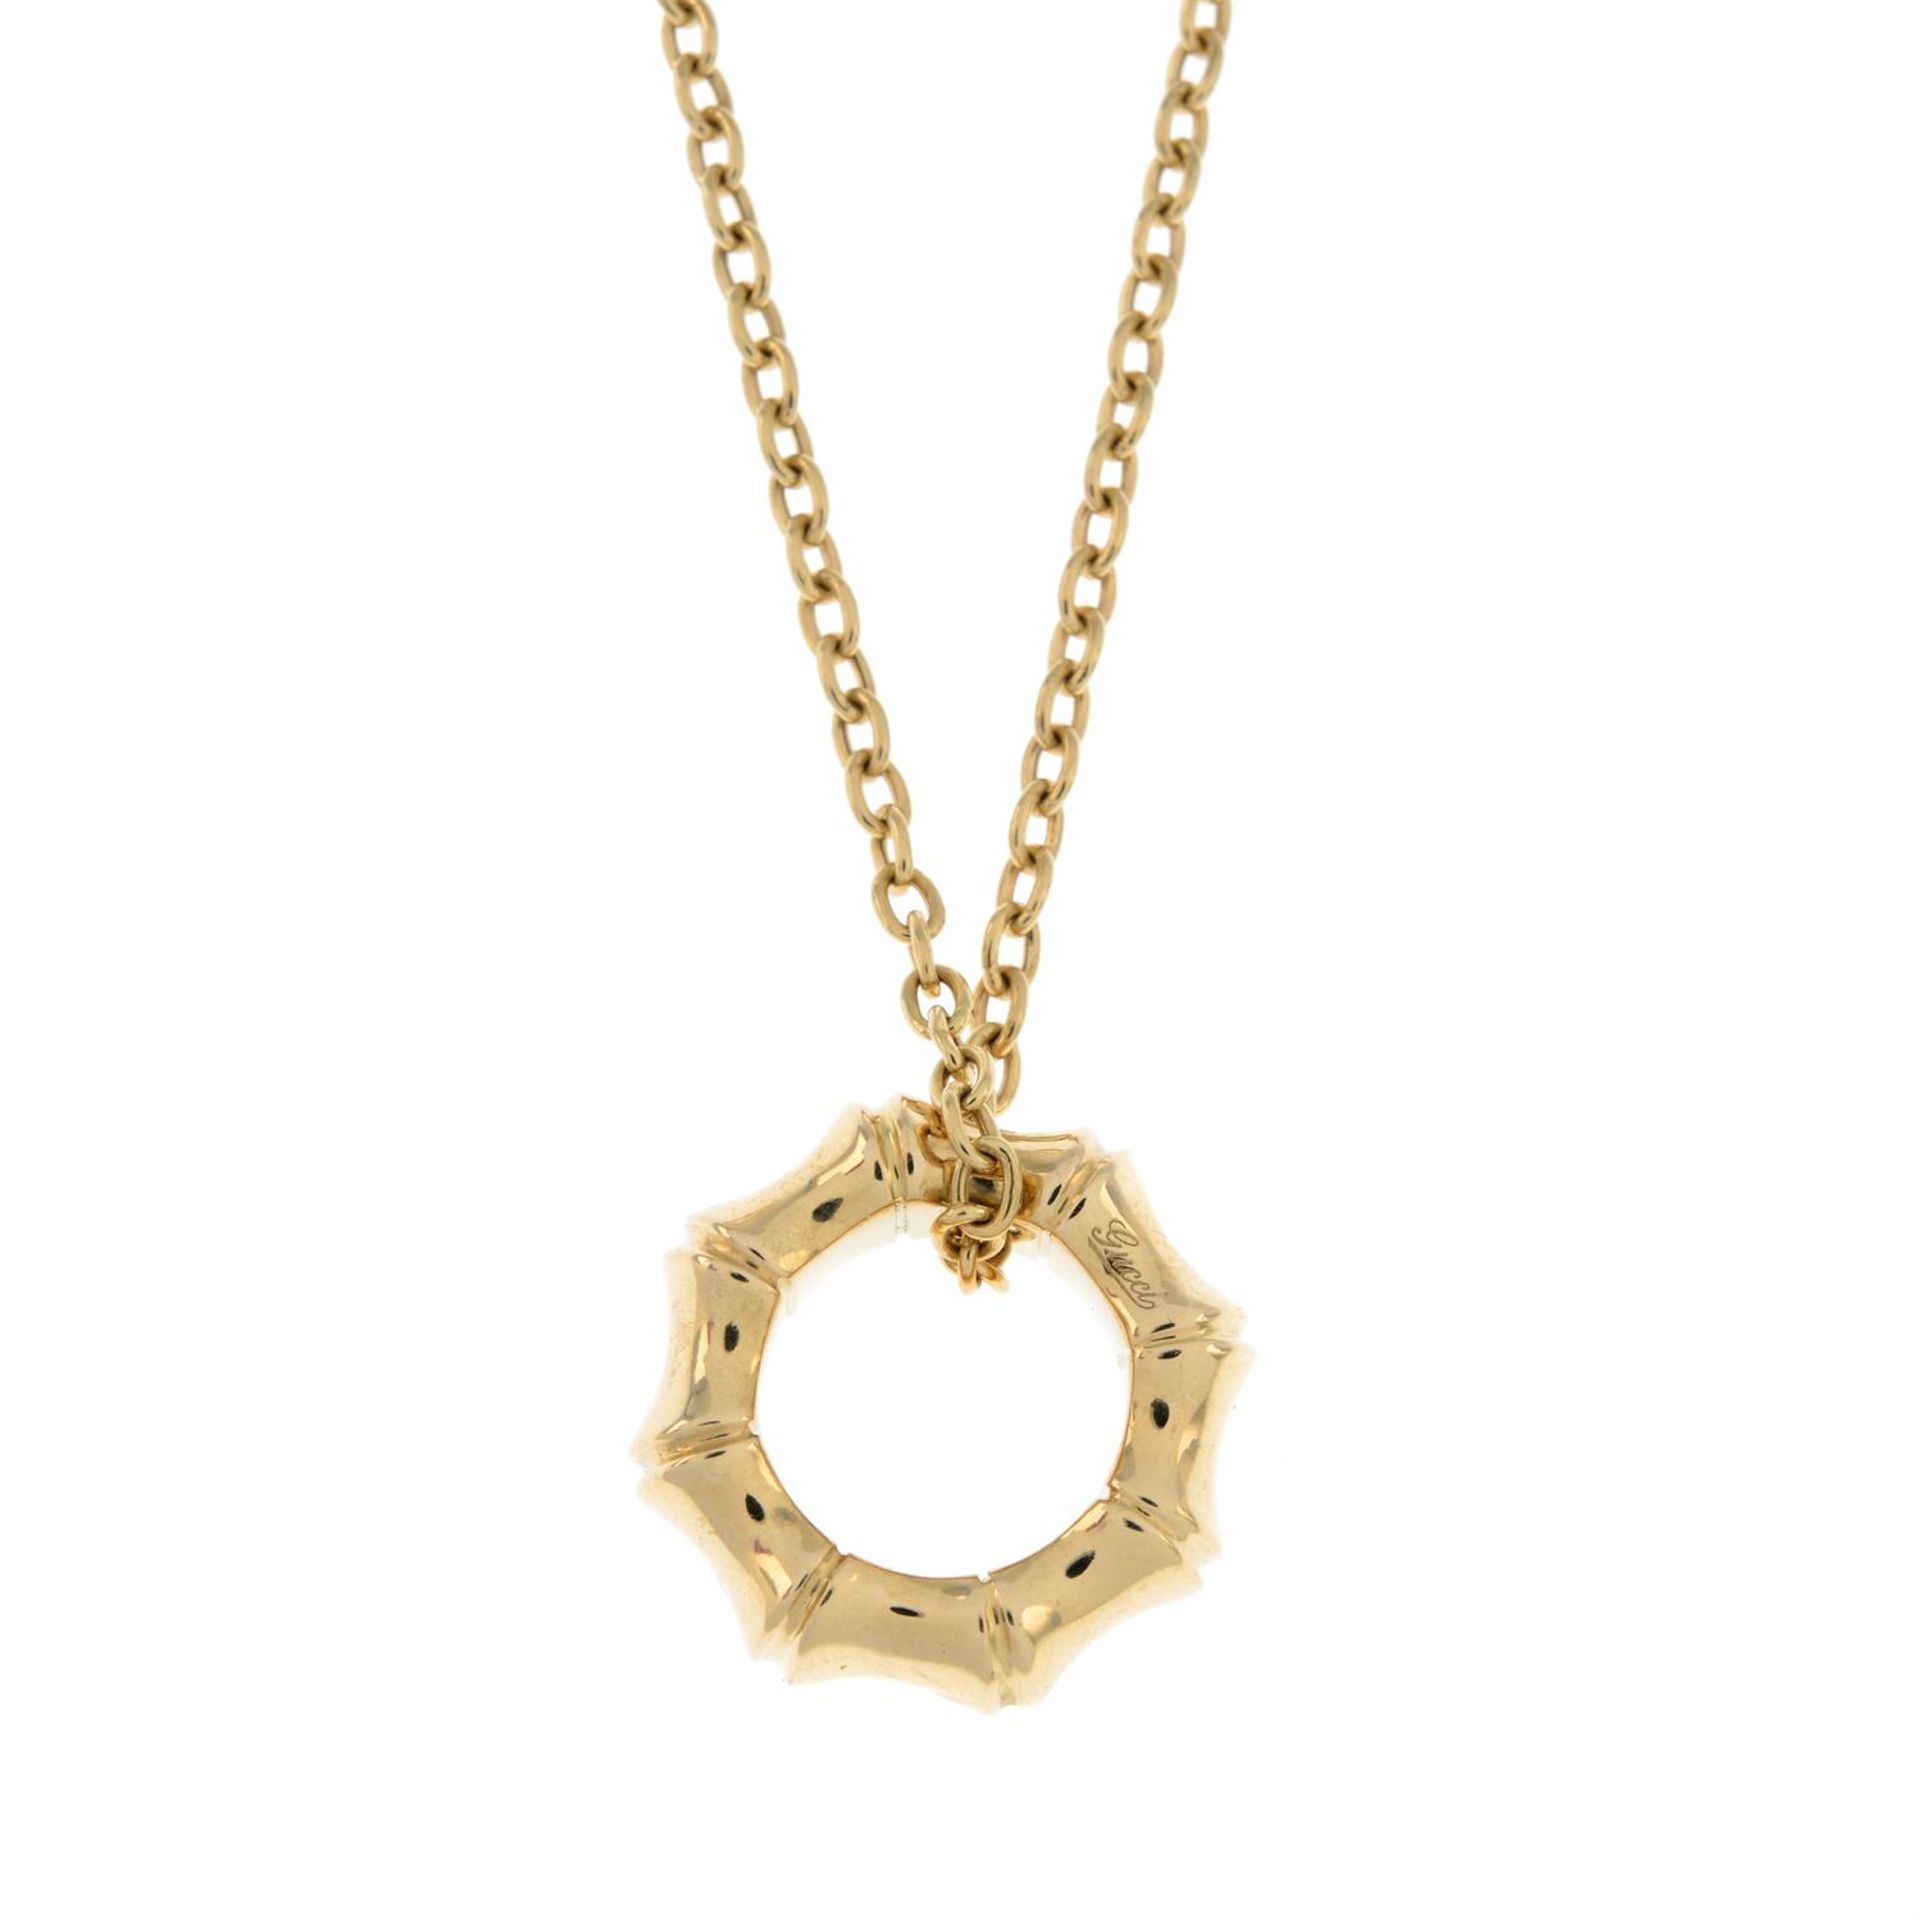 18ct gold bamboo pendant, on chain, by Gucci